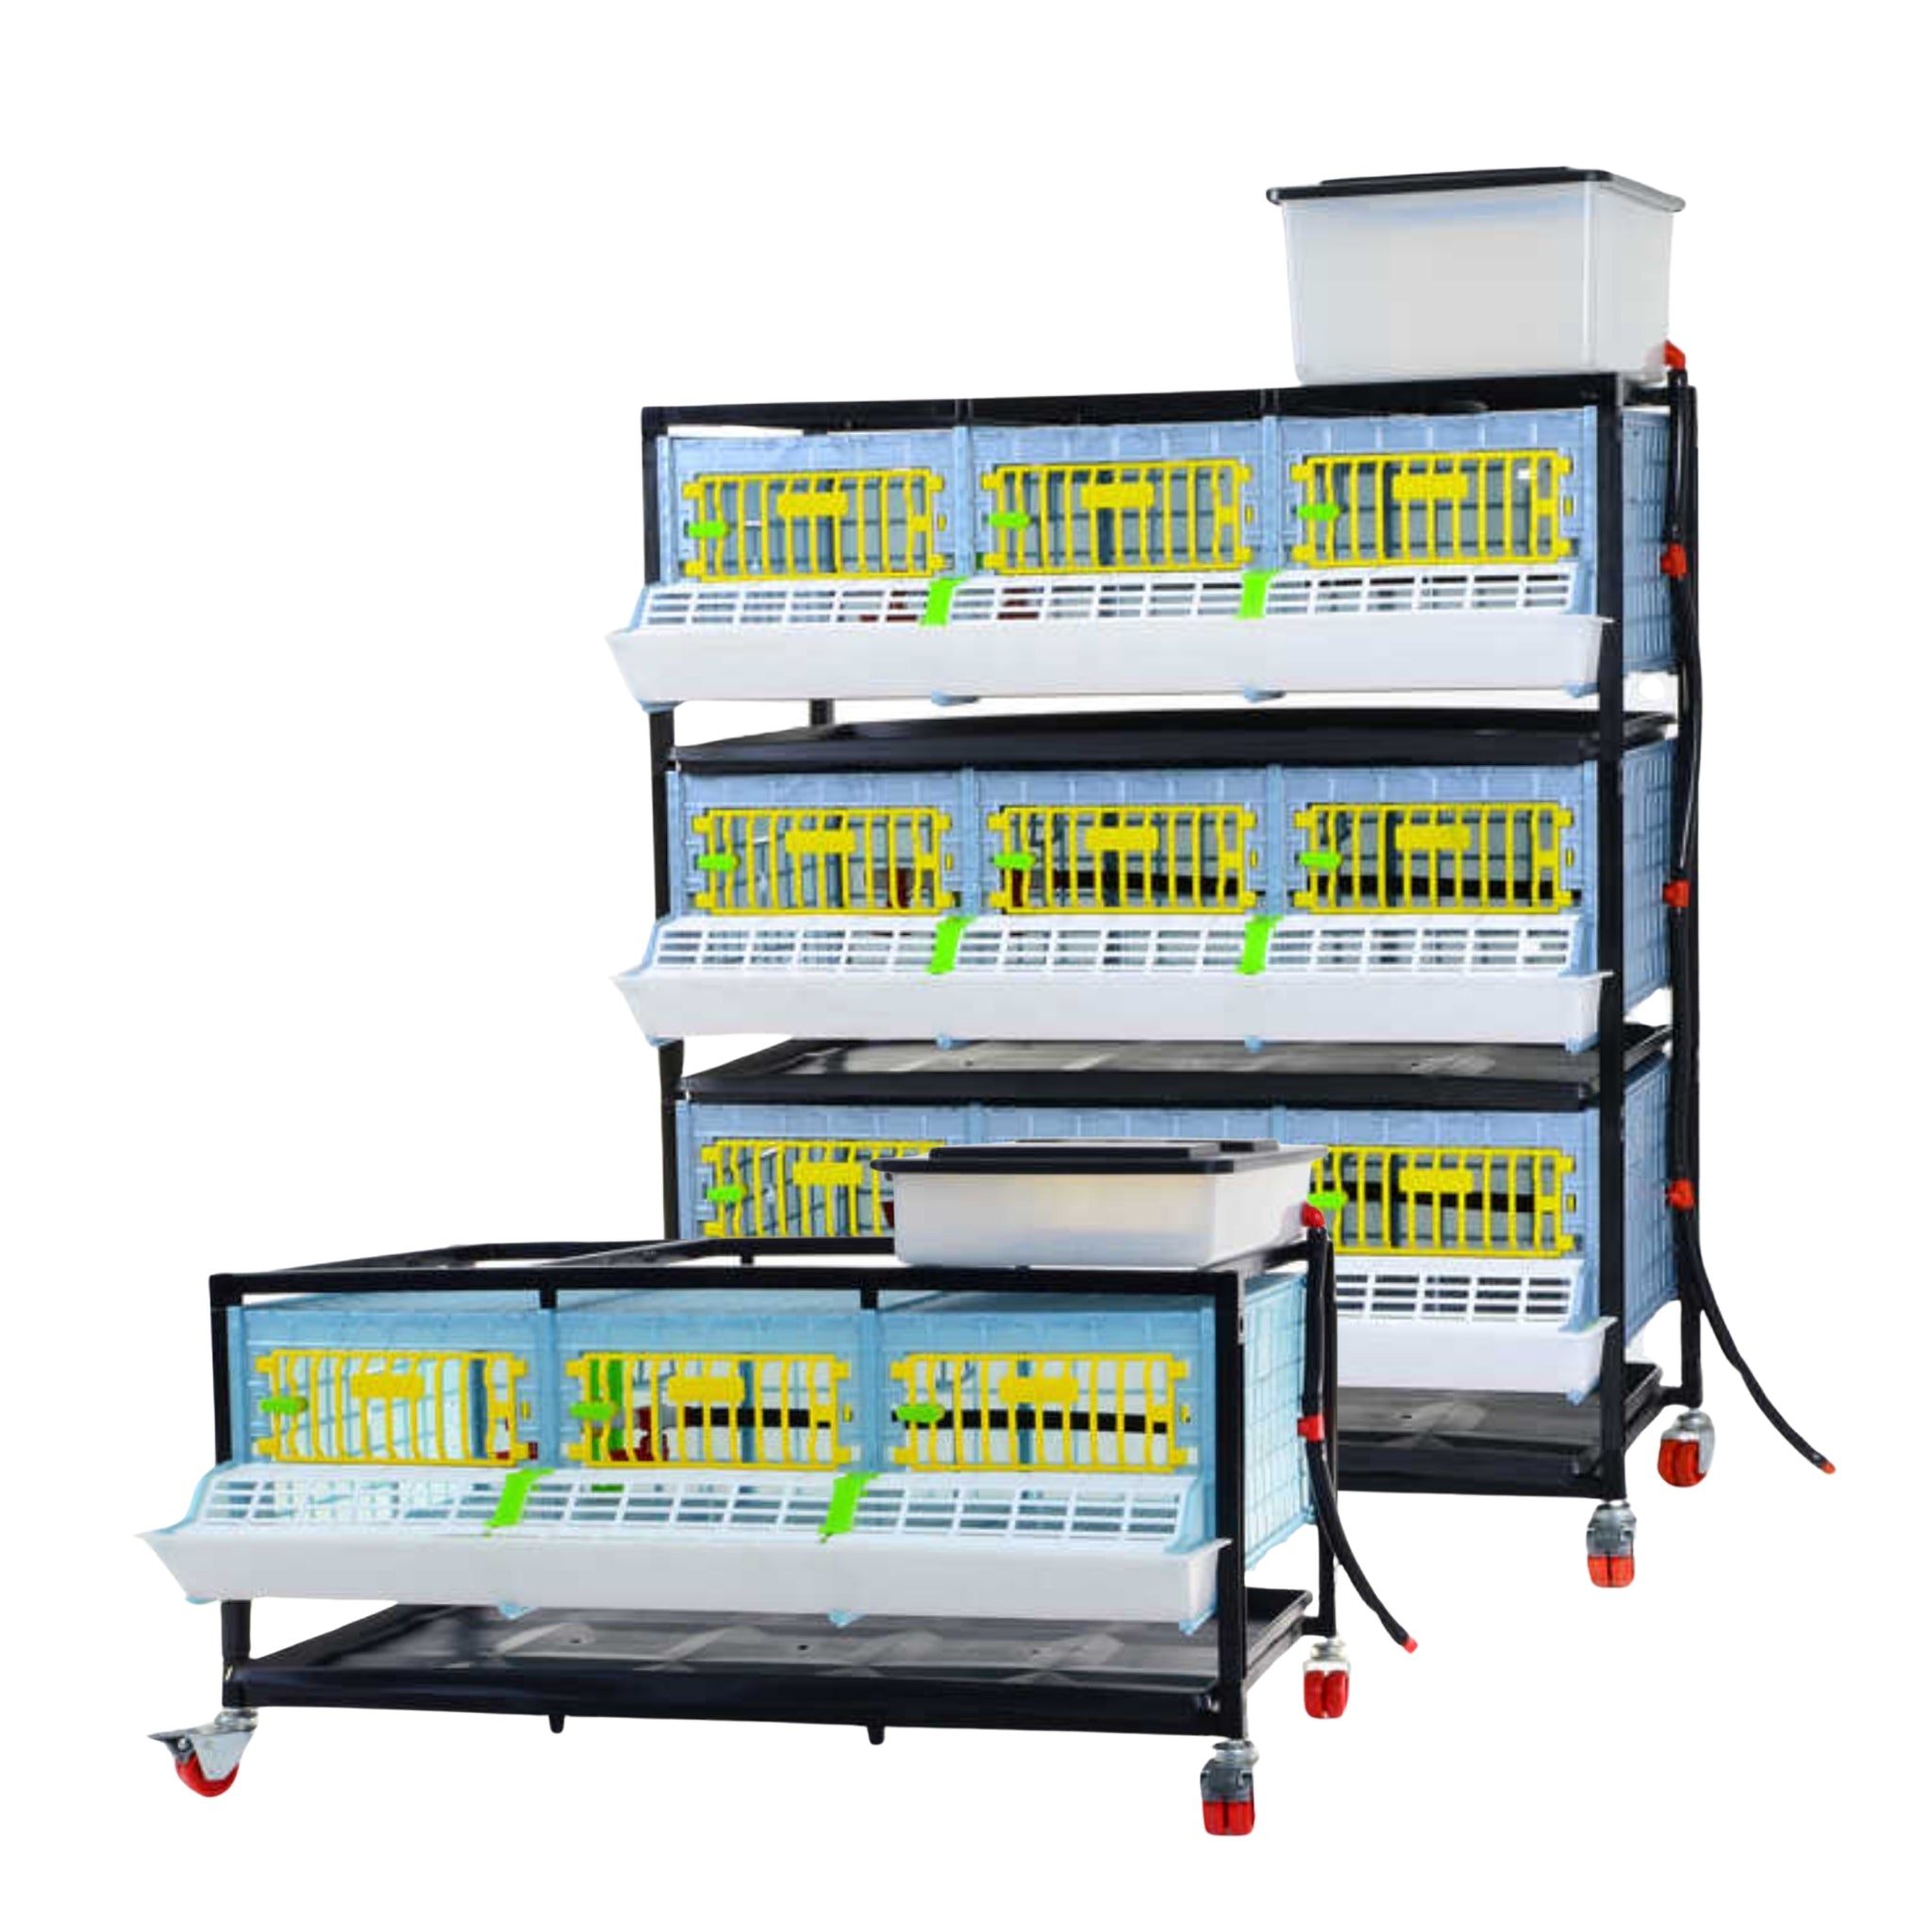 Hatching Time Cimuka. 1 layer cb25 chick brooding pen and 3 layer cb25 chick brooders can be seen in image with feeding troughs and water drinker system built-in.